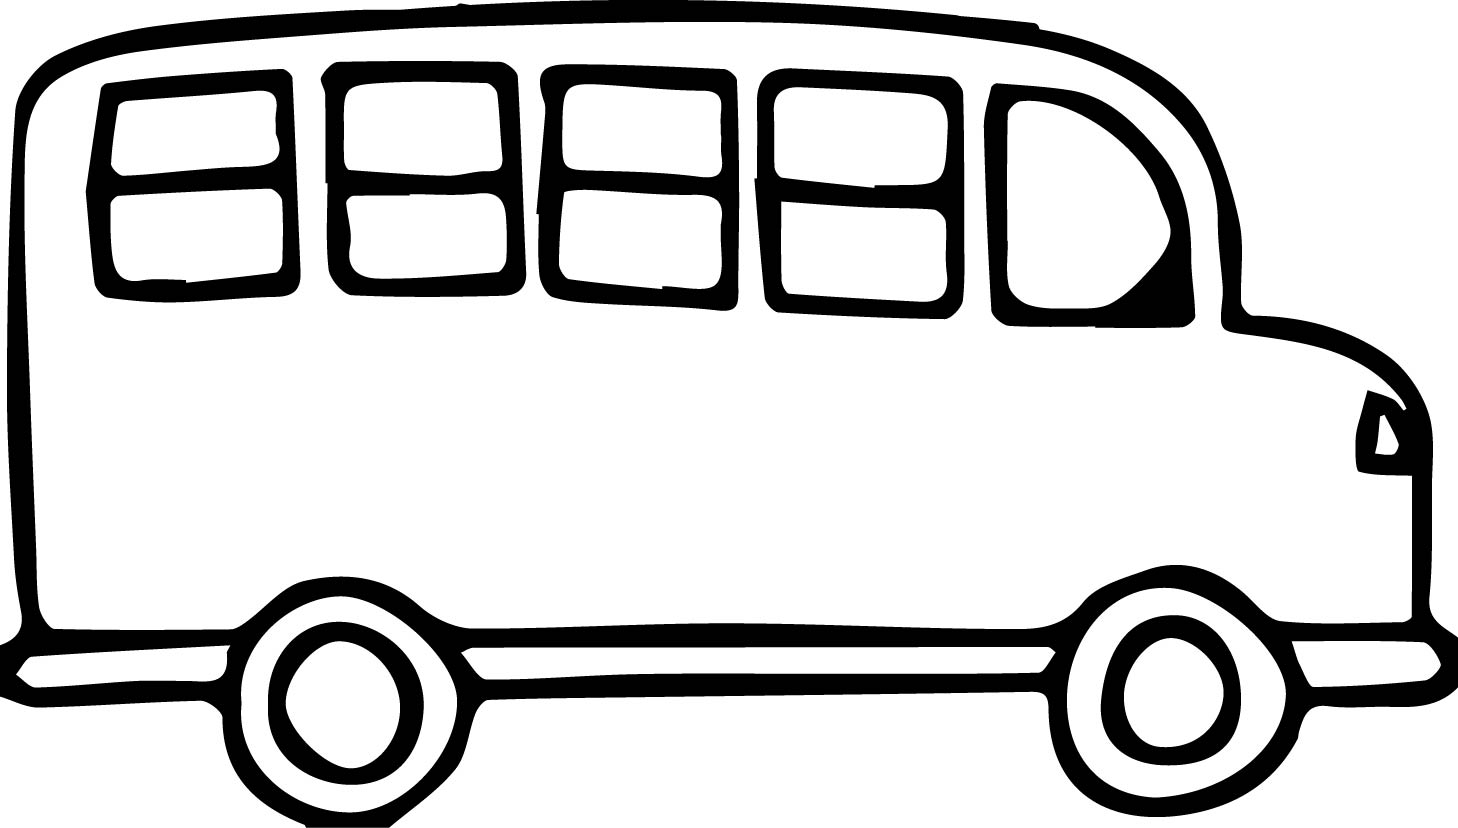 Bus Black And White Clipart.